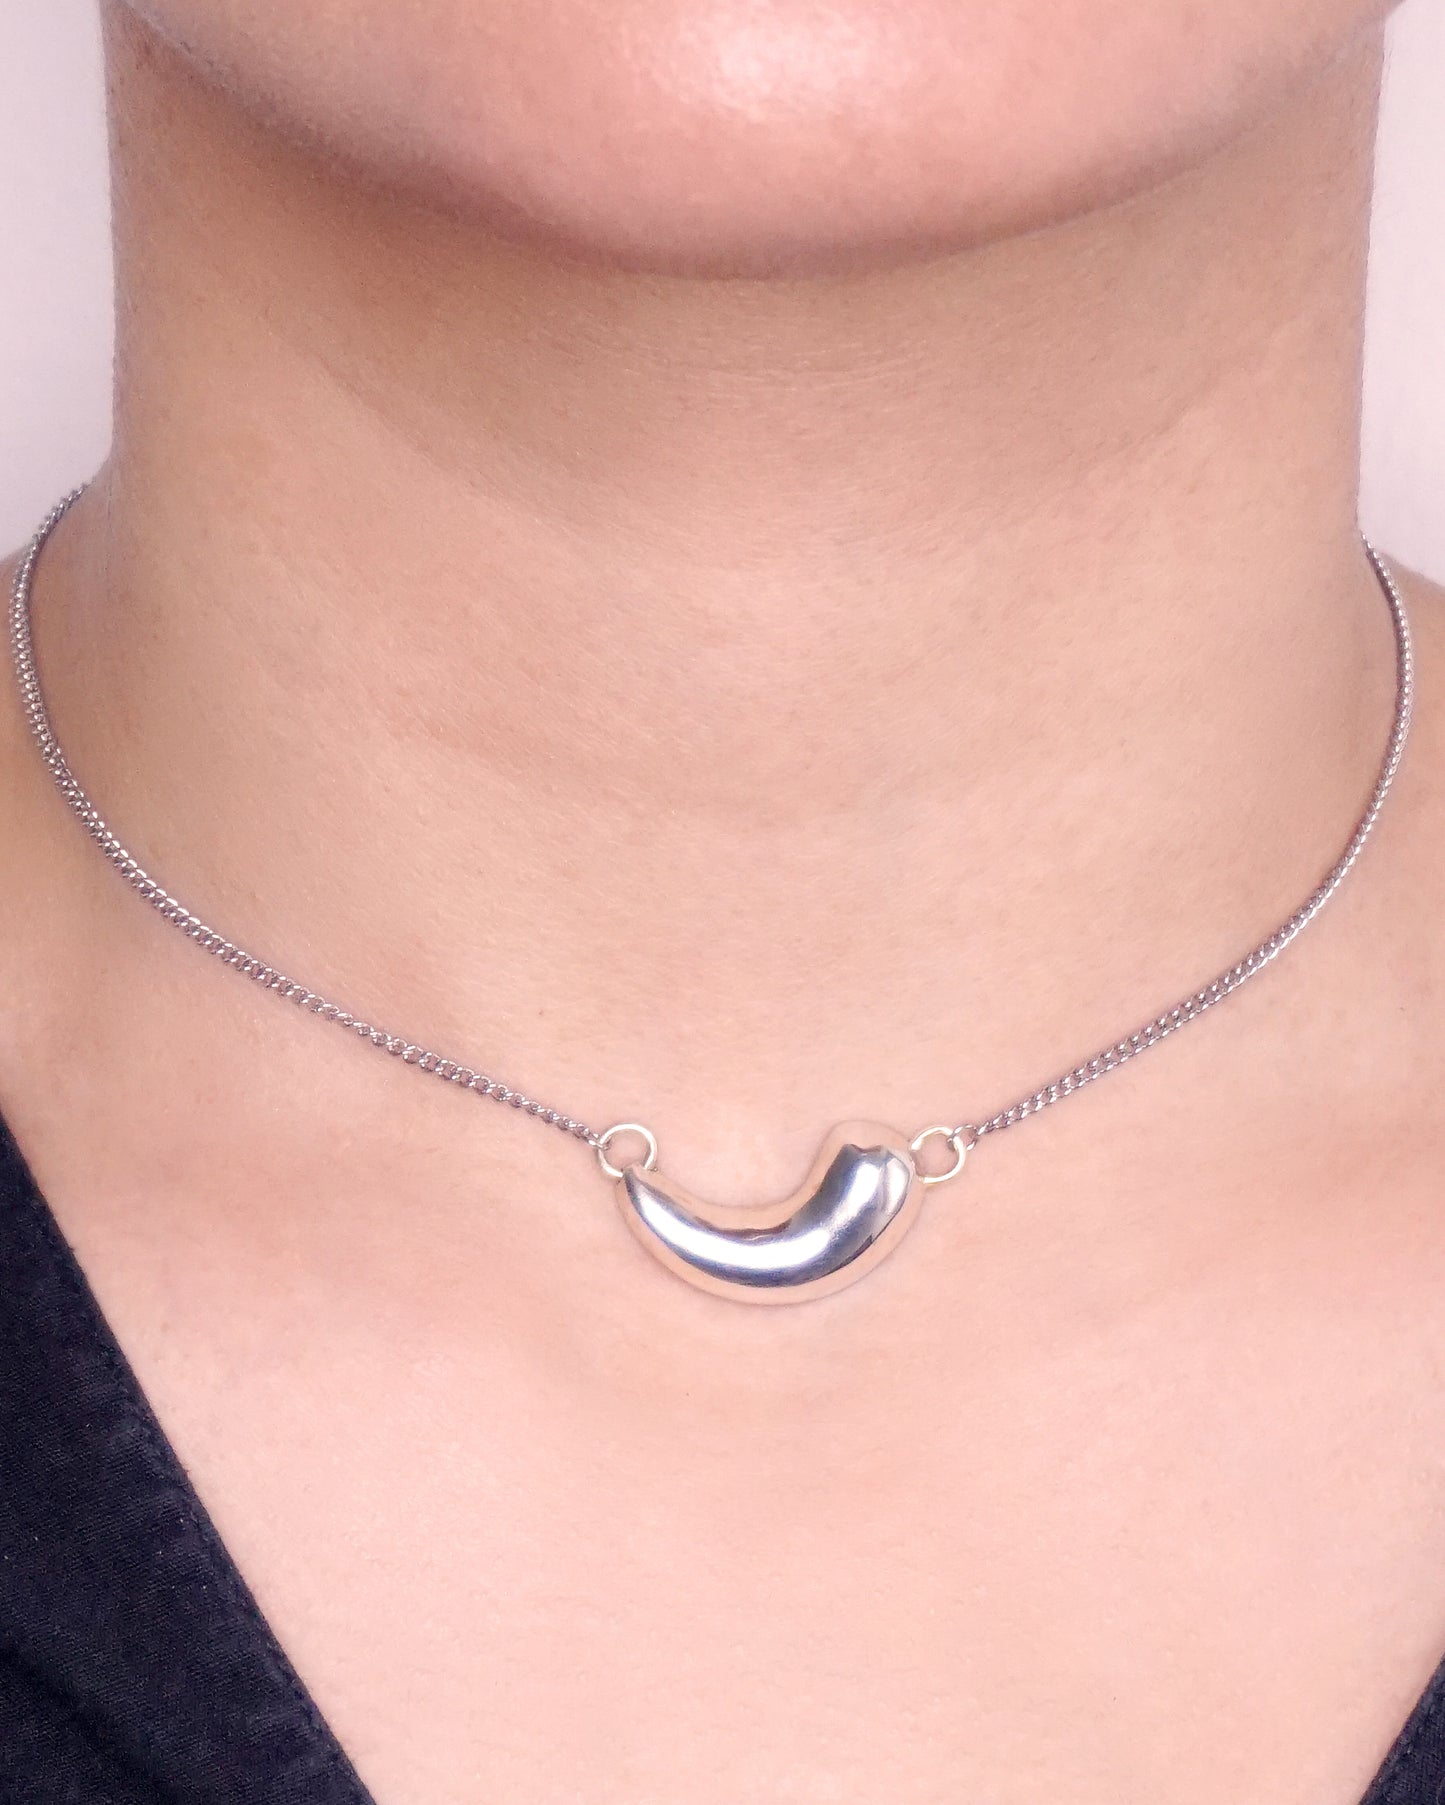 Bean Necklace 3.0 - ISSHU